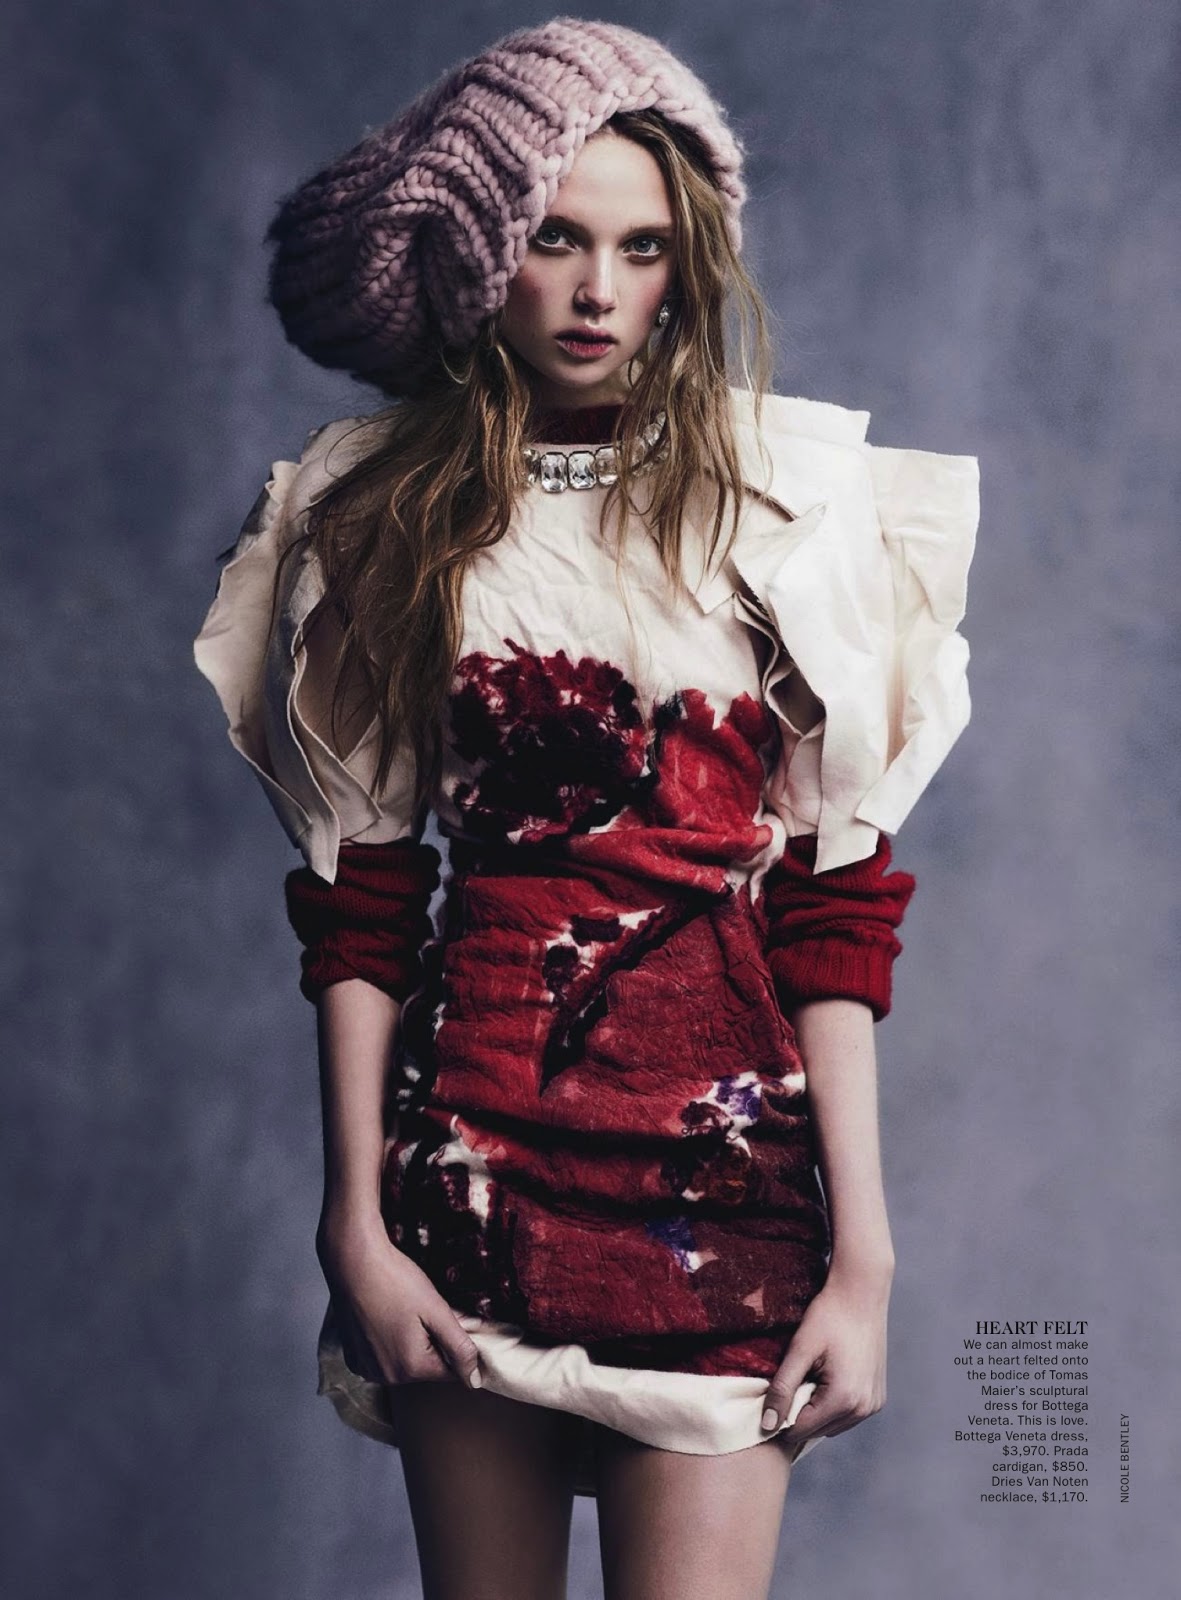 wild rose: holly rose by nicole bentley for vogue australia august 2013